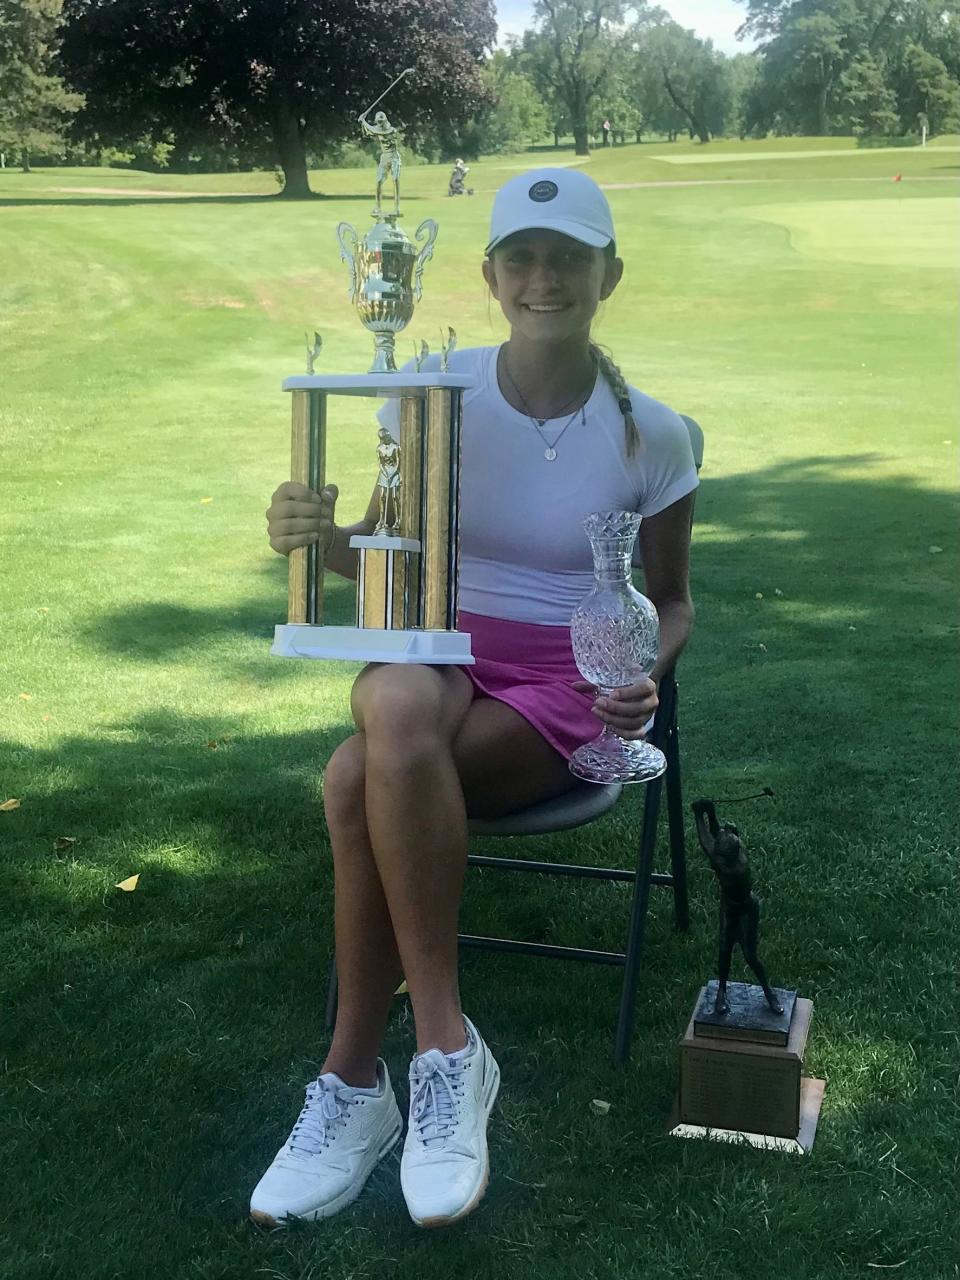 Perrysburg's Sydney Deal poses with the trophies she earned at the end of the two-day, 36-hole Ohio Junior Girls Championship completed Tuesday at Marion Country Club.